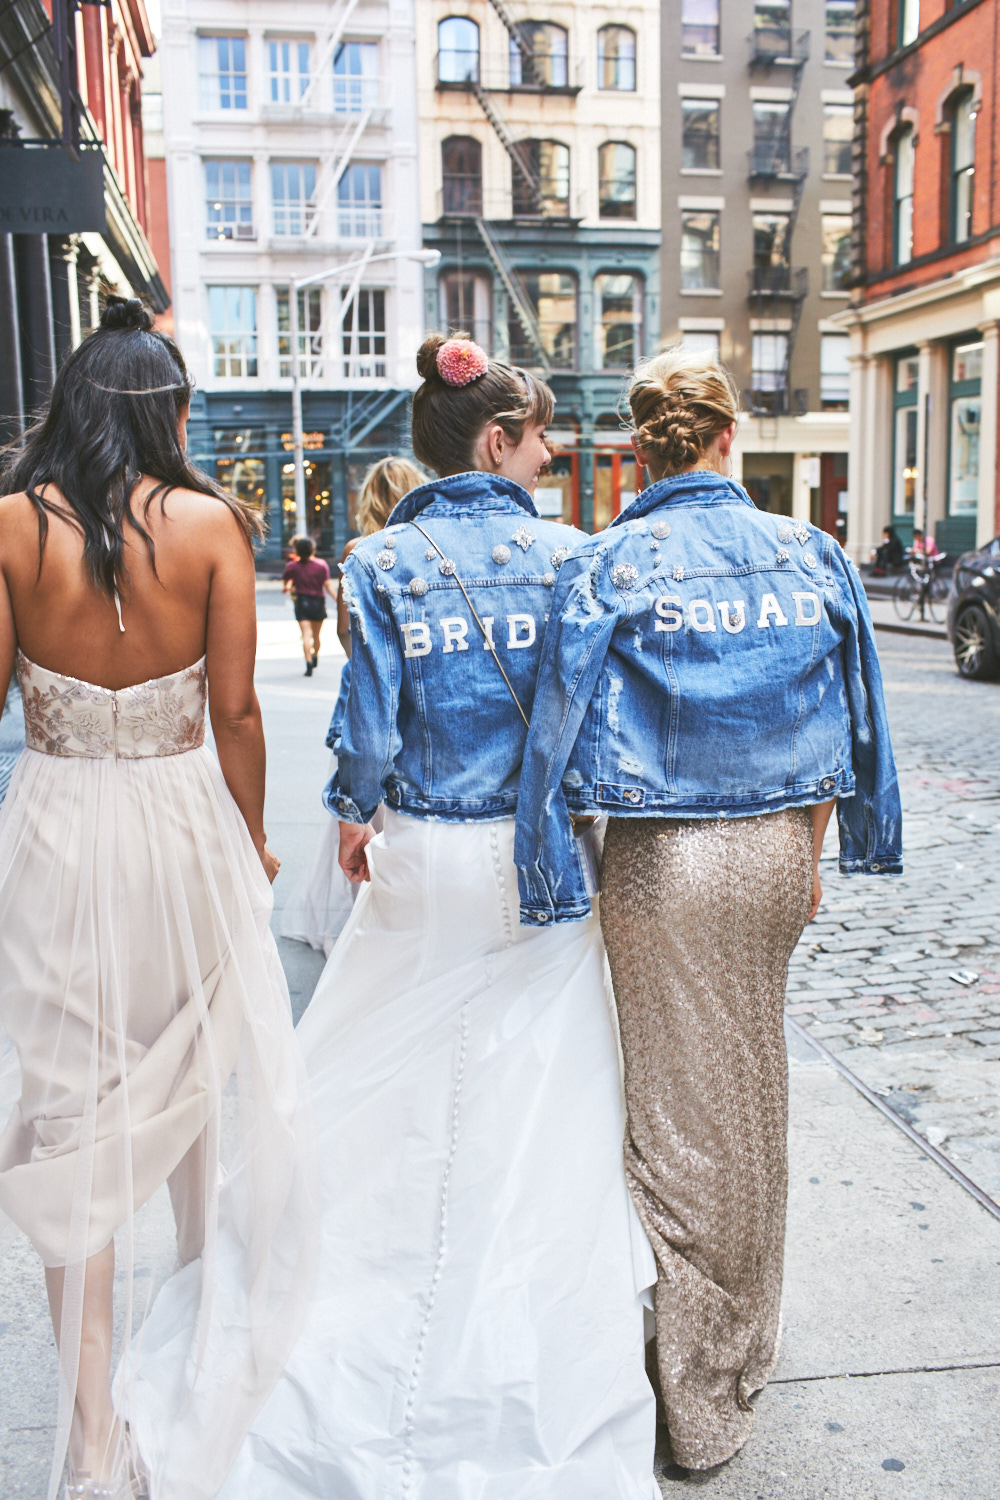 bride and bridesmaids in sequins walking down a street in NYC wearing denim jackets that say bride squad